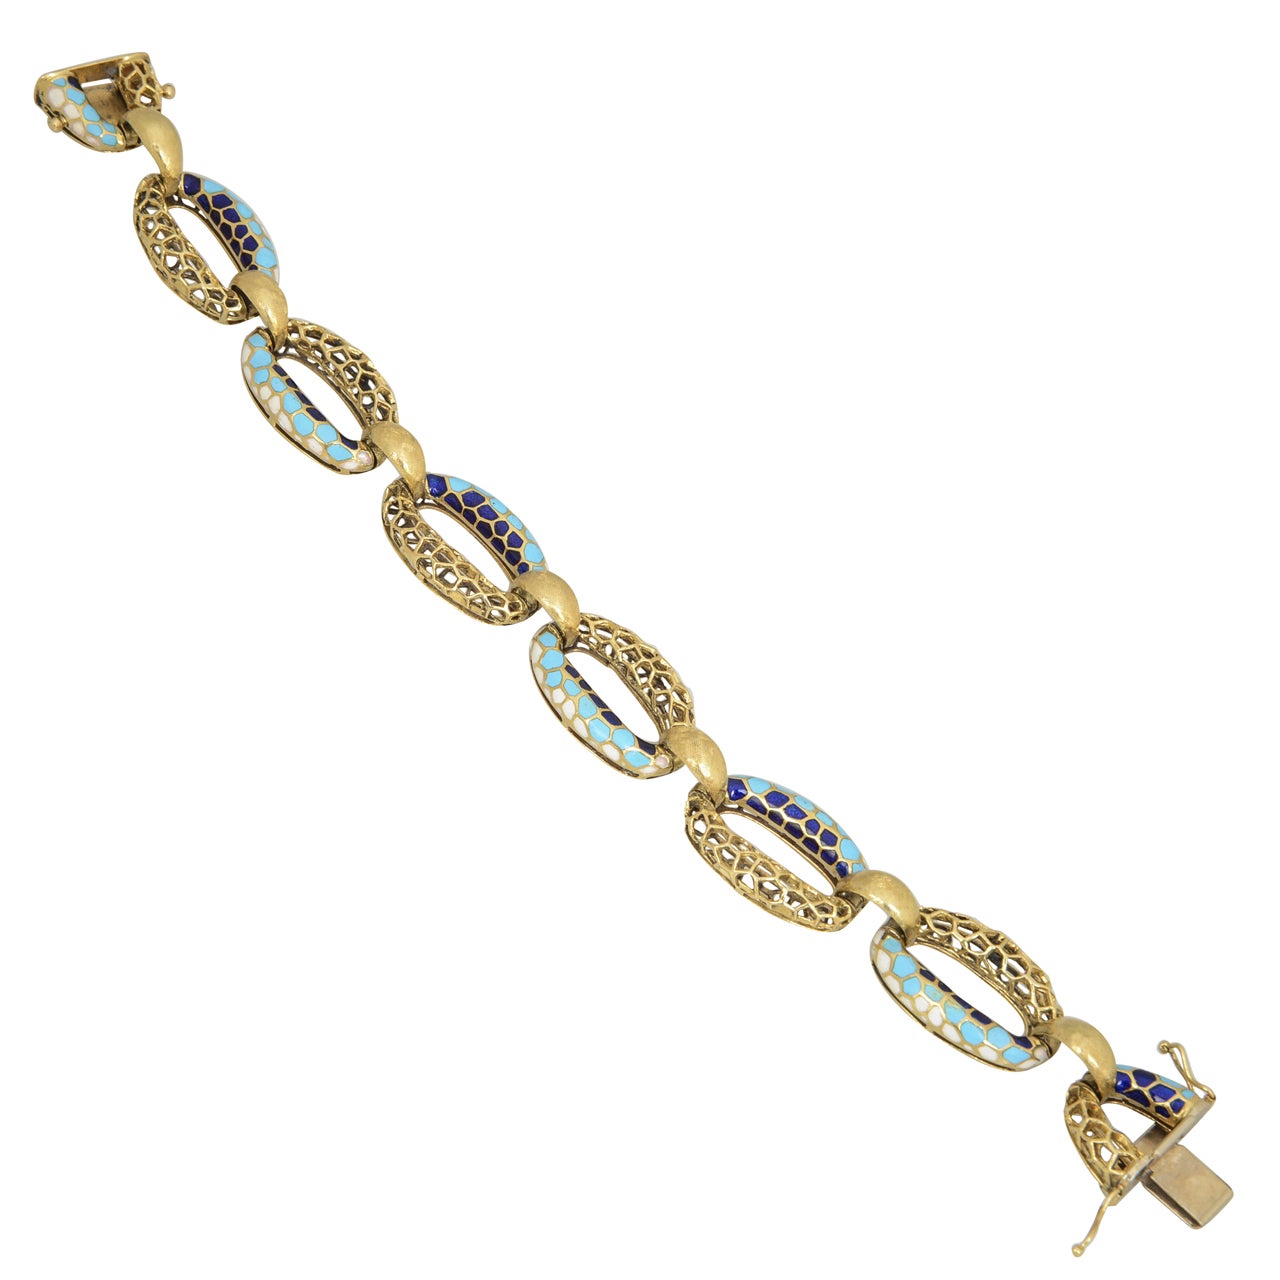 Finely made Italian enamel bracelet with links that are half gold honeycomb pattern and the other half navy, baby blue, and white enamel.  These links are connected with a florentine finish gold bridge.  It was made between the 1960's- 1970's.  18k